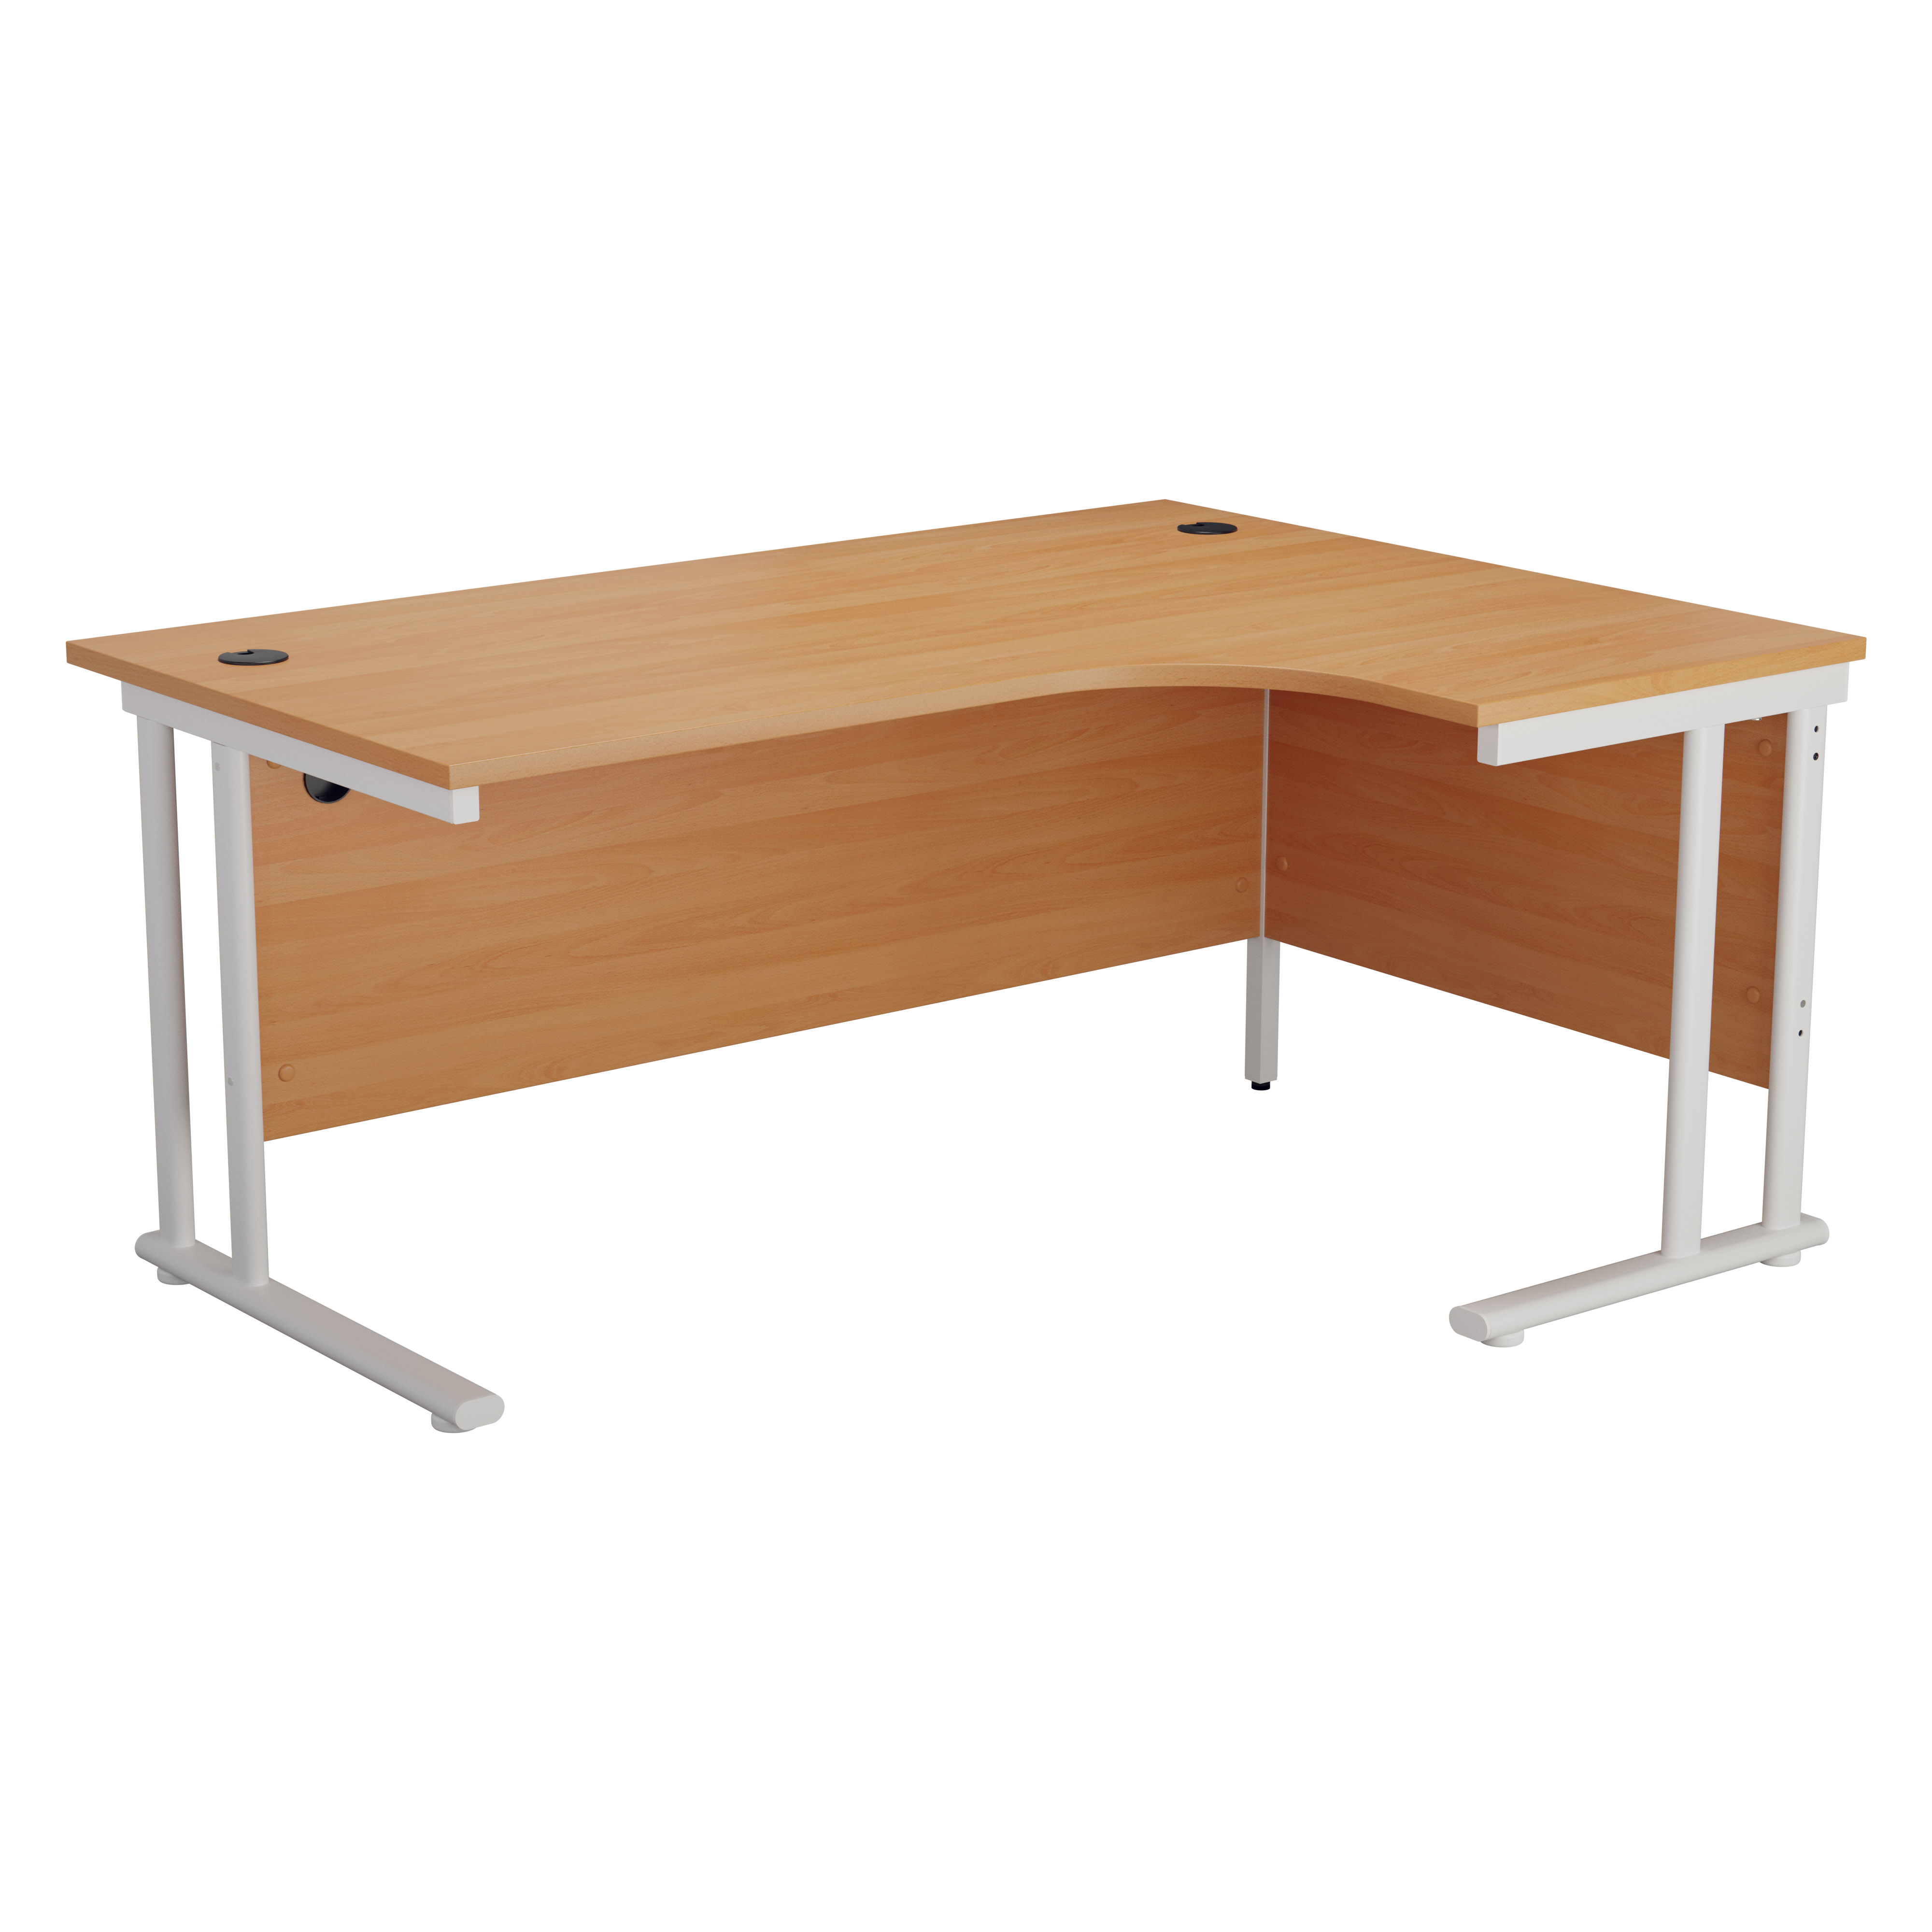 Start 1600 Crescent Cantilever Workstation RH - Beech Top and White Legs